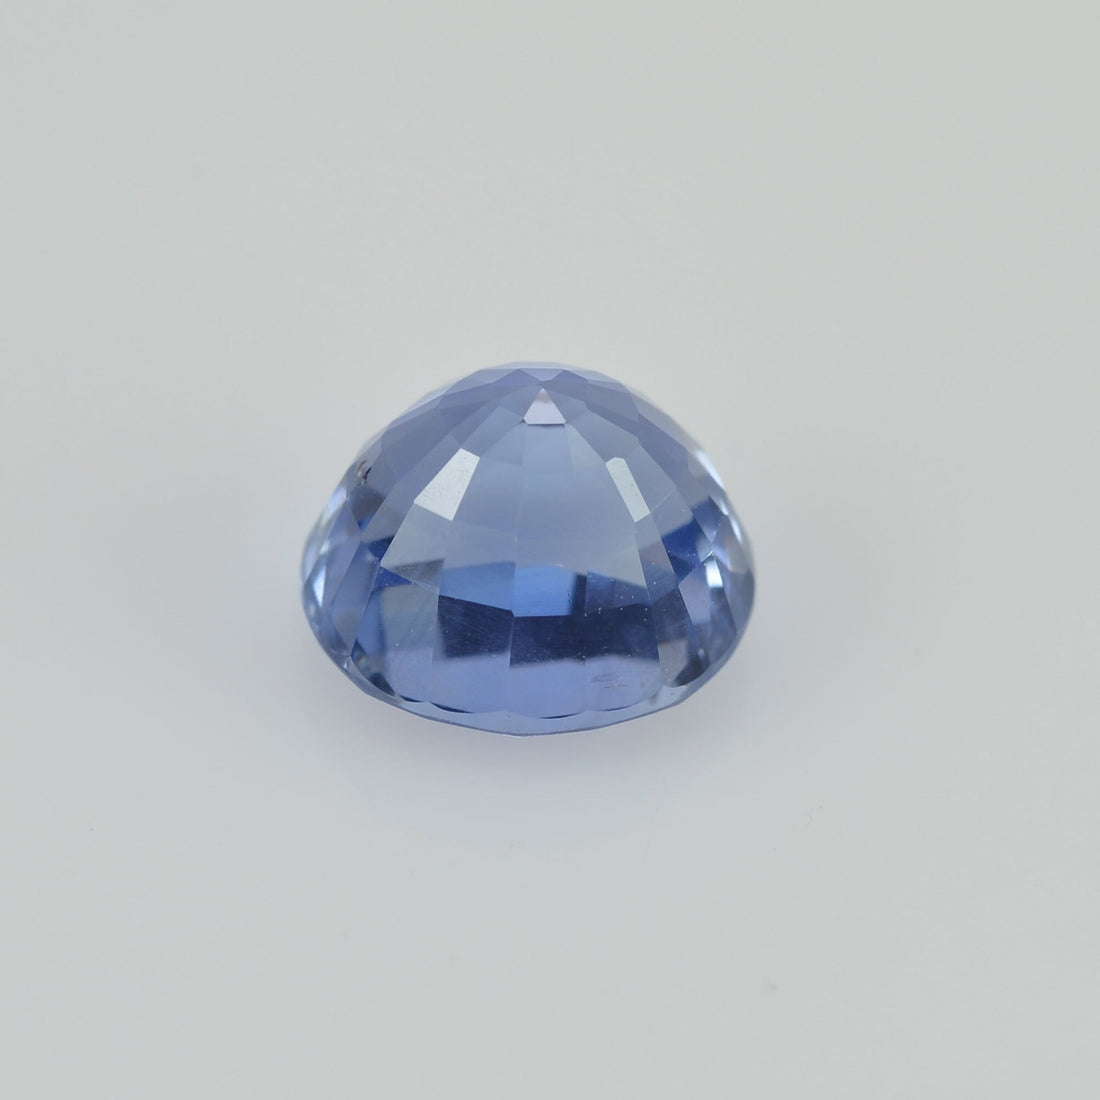 2.31 cts Unheated Natural Blue Sapphire Loose Gemstone Oval Cut Certified